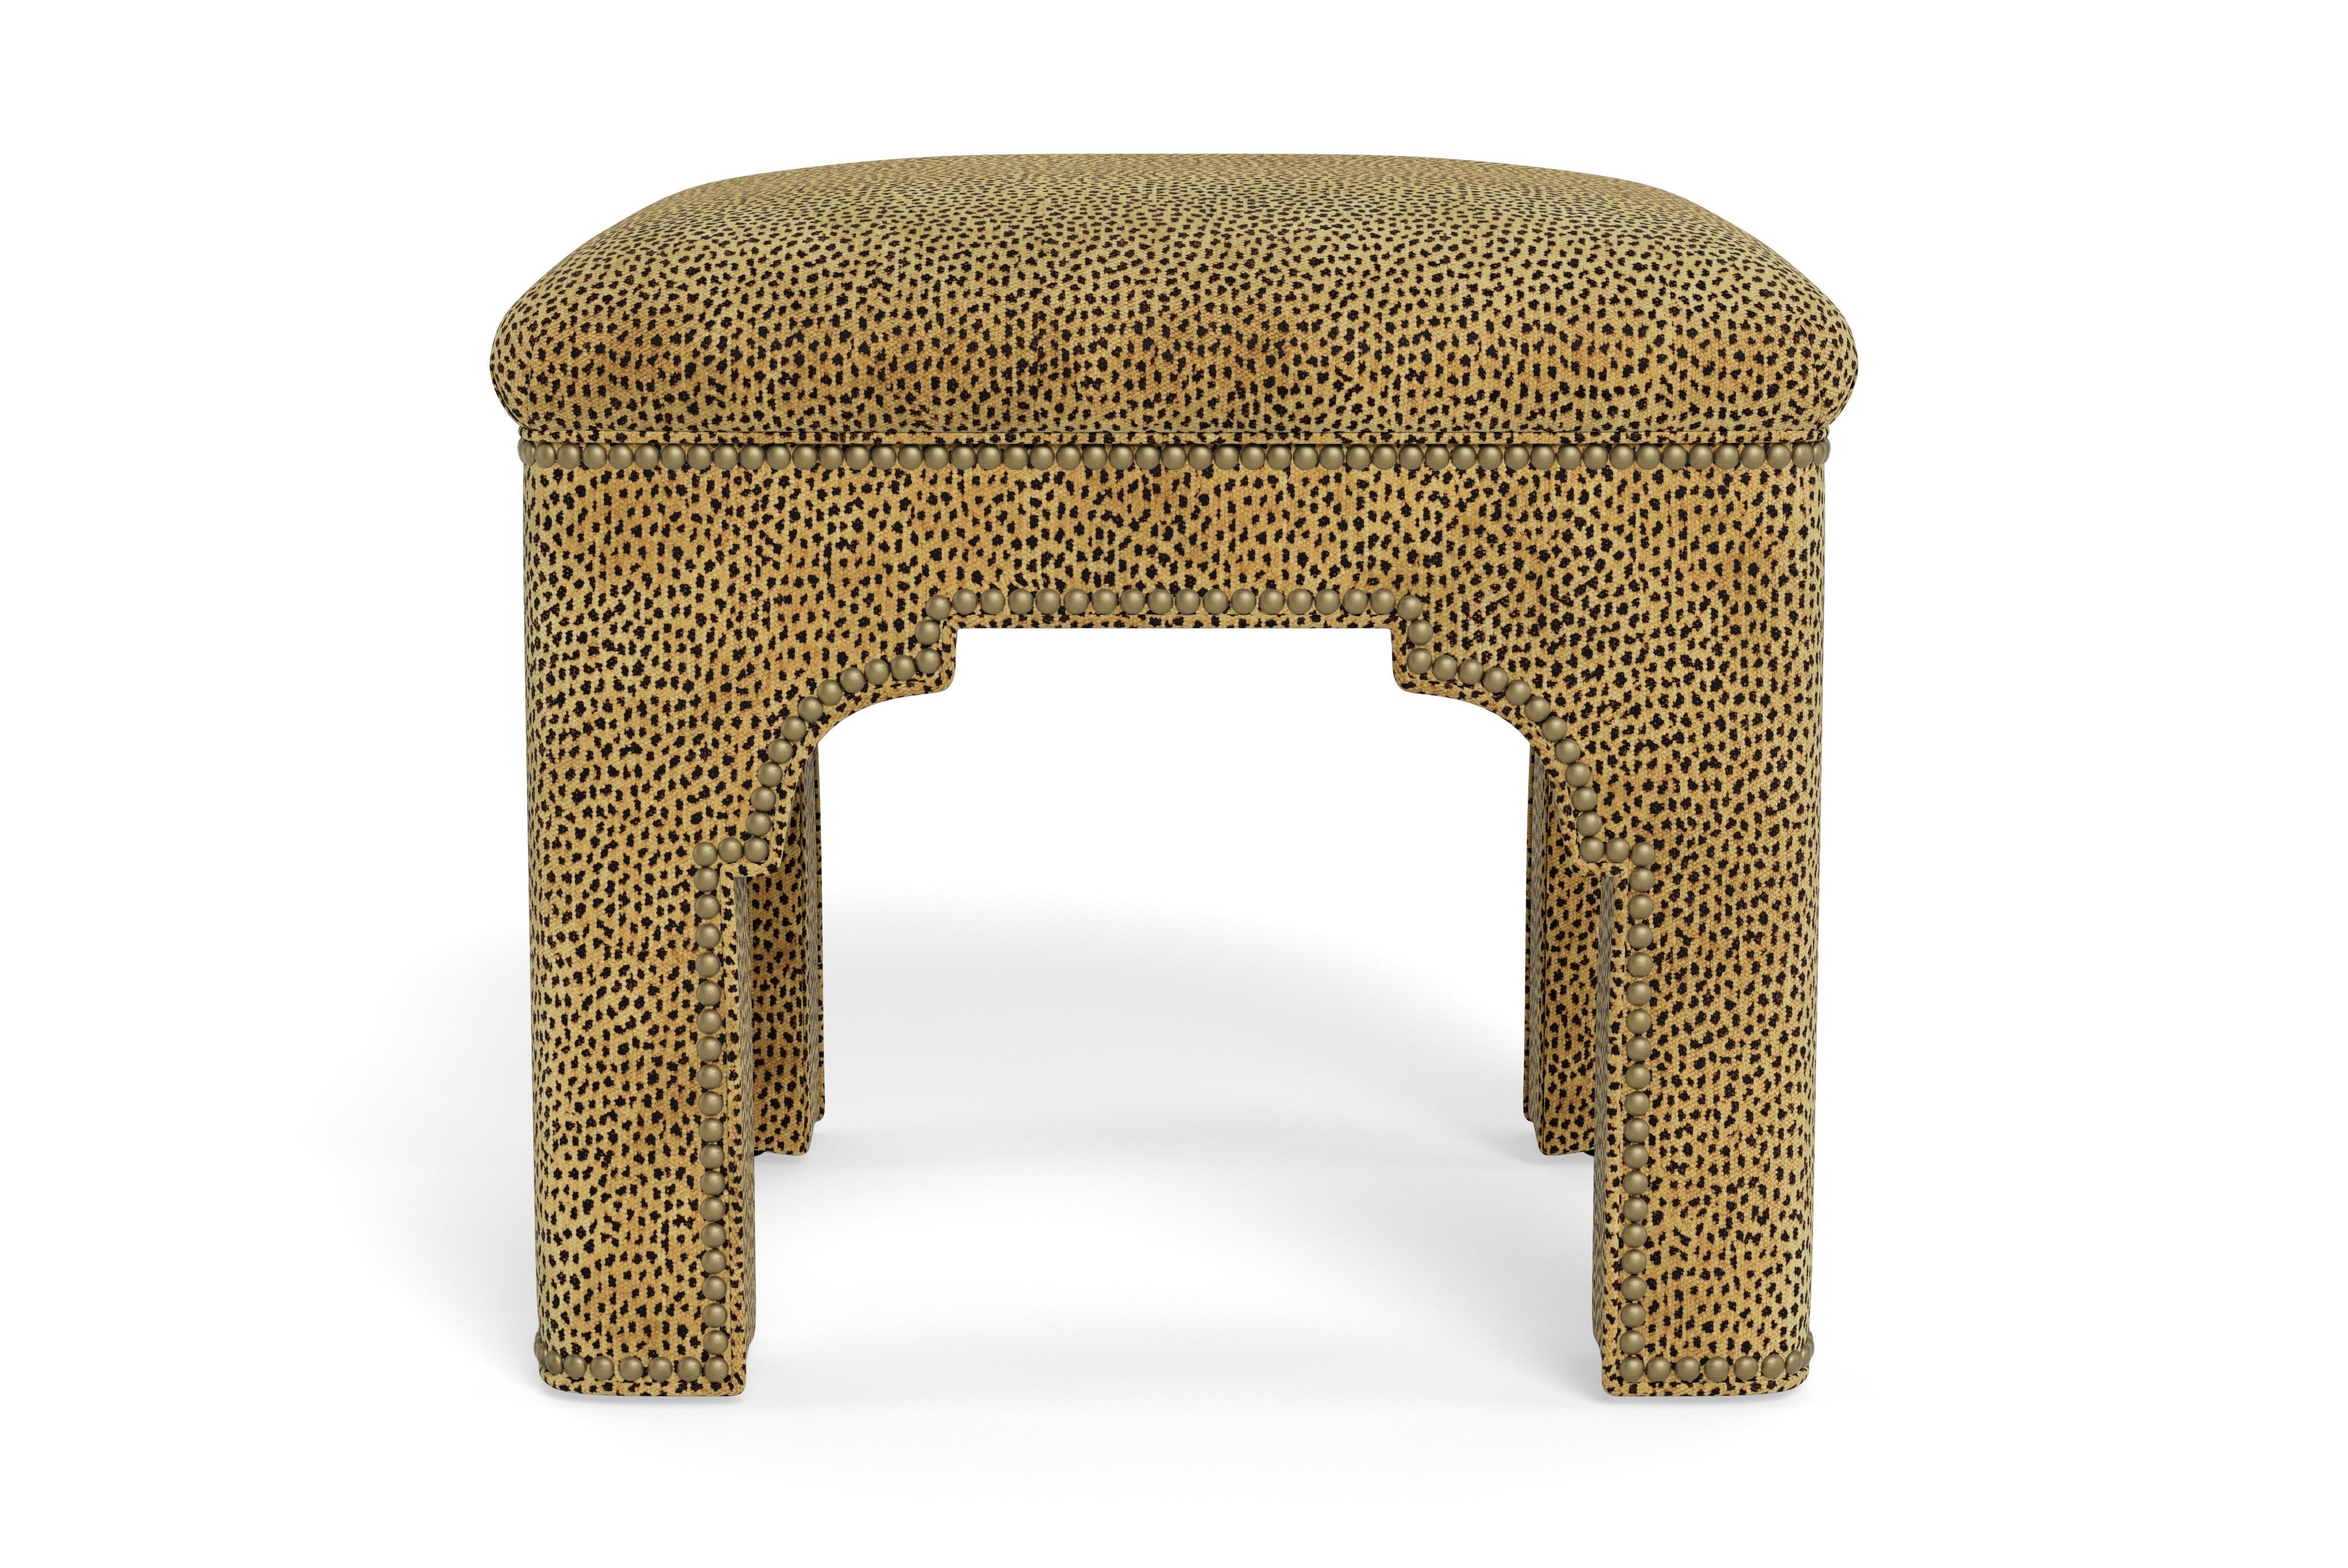 Add a chic accent to any room with this compact stool on its own or displayed in pairs.  Made to order in natural leopard chenille with antique brass nail heads. The tightly upholstered seat covers a solid maple frame. A Mughal-inspired arch make it